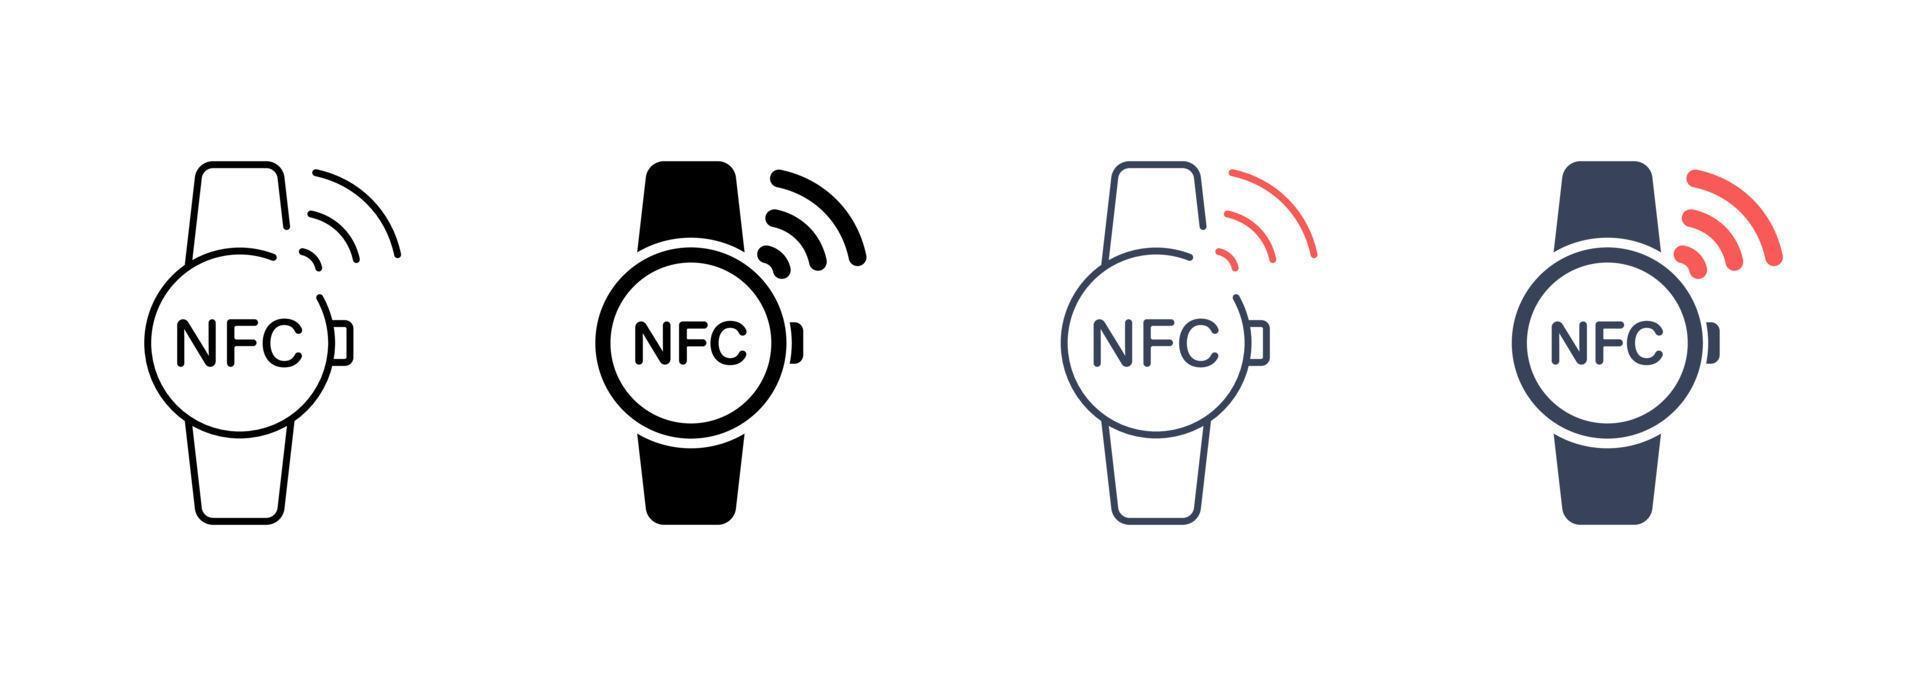 Smart Watch with NFC Technology Line and Silhouette Icon Set. Smartwatch Bracelet Pictogram. Watch for Contactless Payment Symbol Collection on White Background. Isolated Vector Illustration.